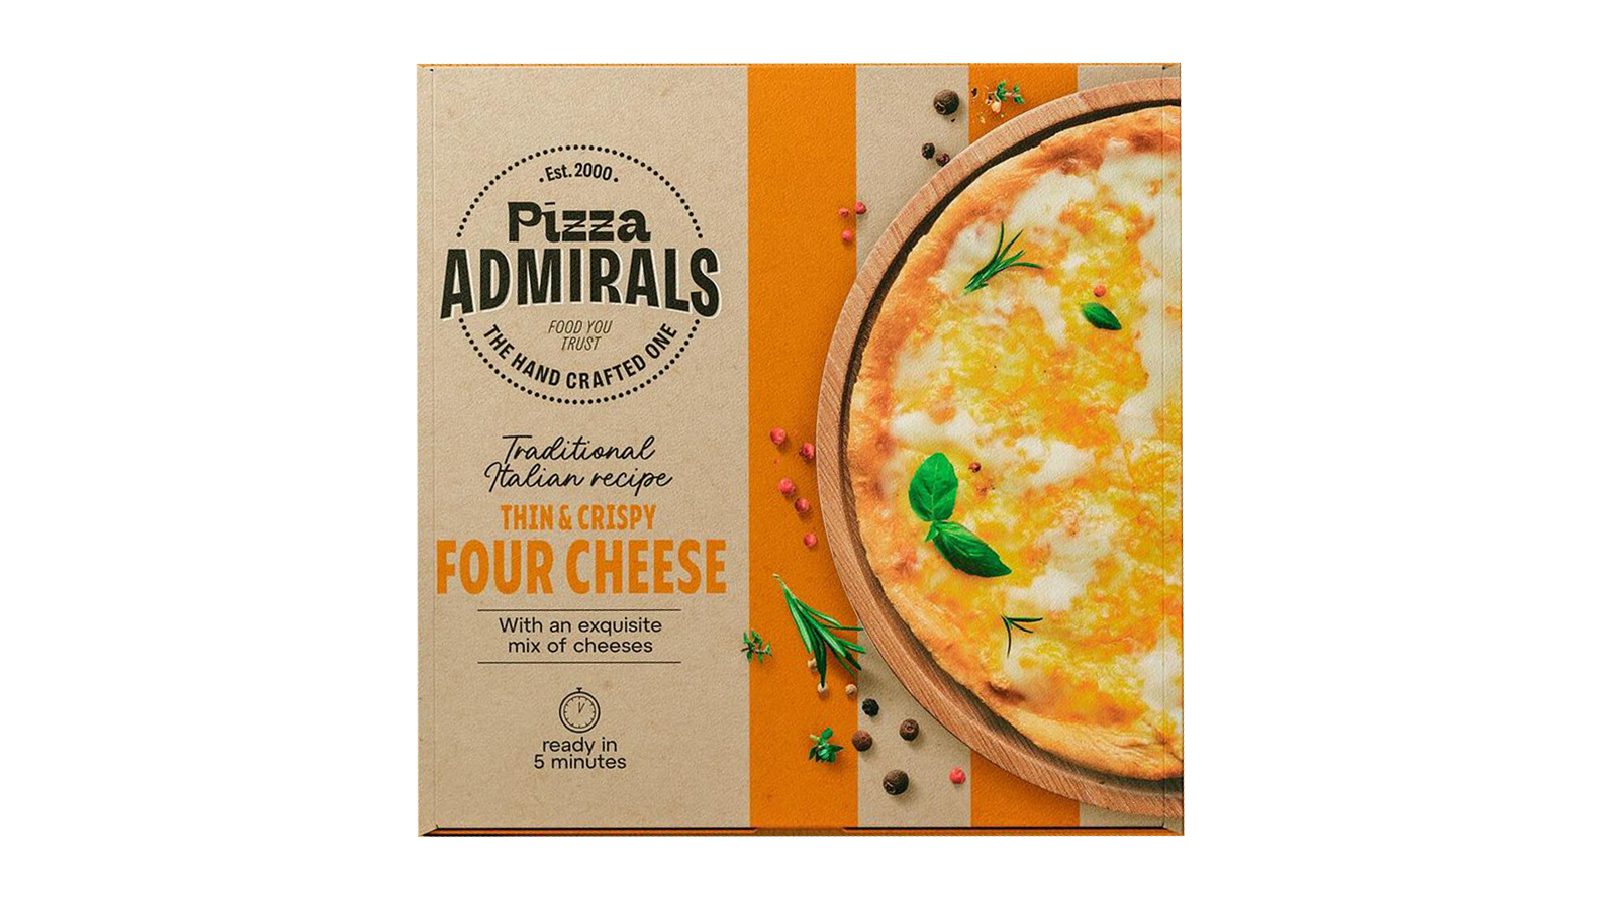 Admirals Four Cheese pizza Buy 1 get 1 free - Buy Like Chefs